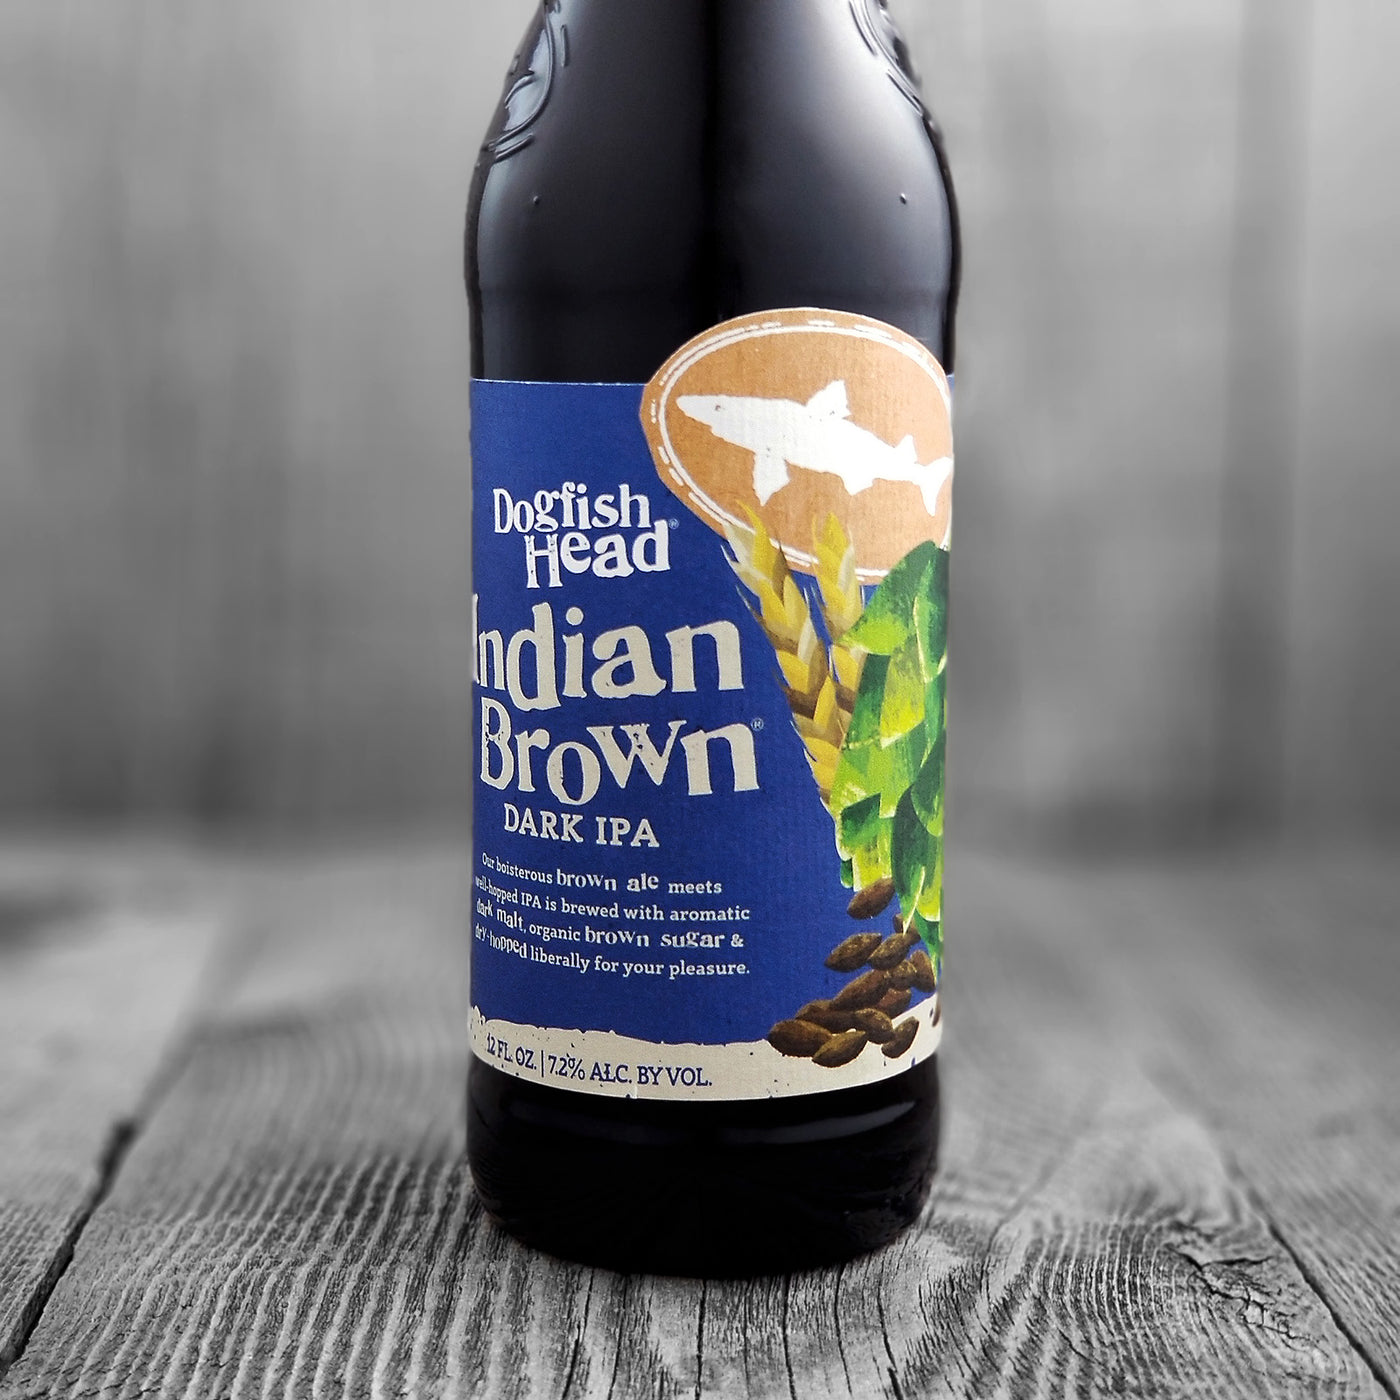 Dogfish Head Indian Brown ale